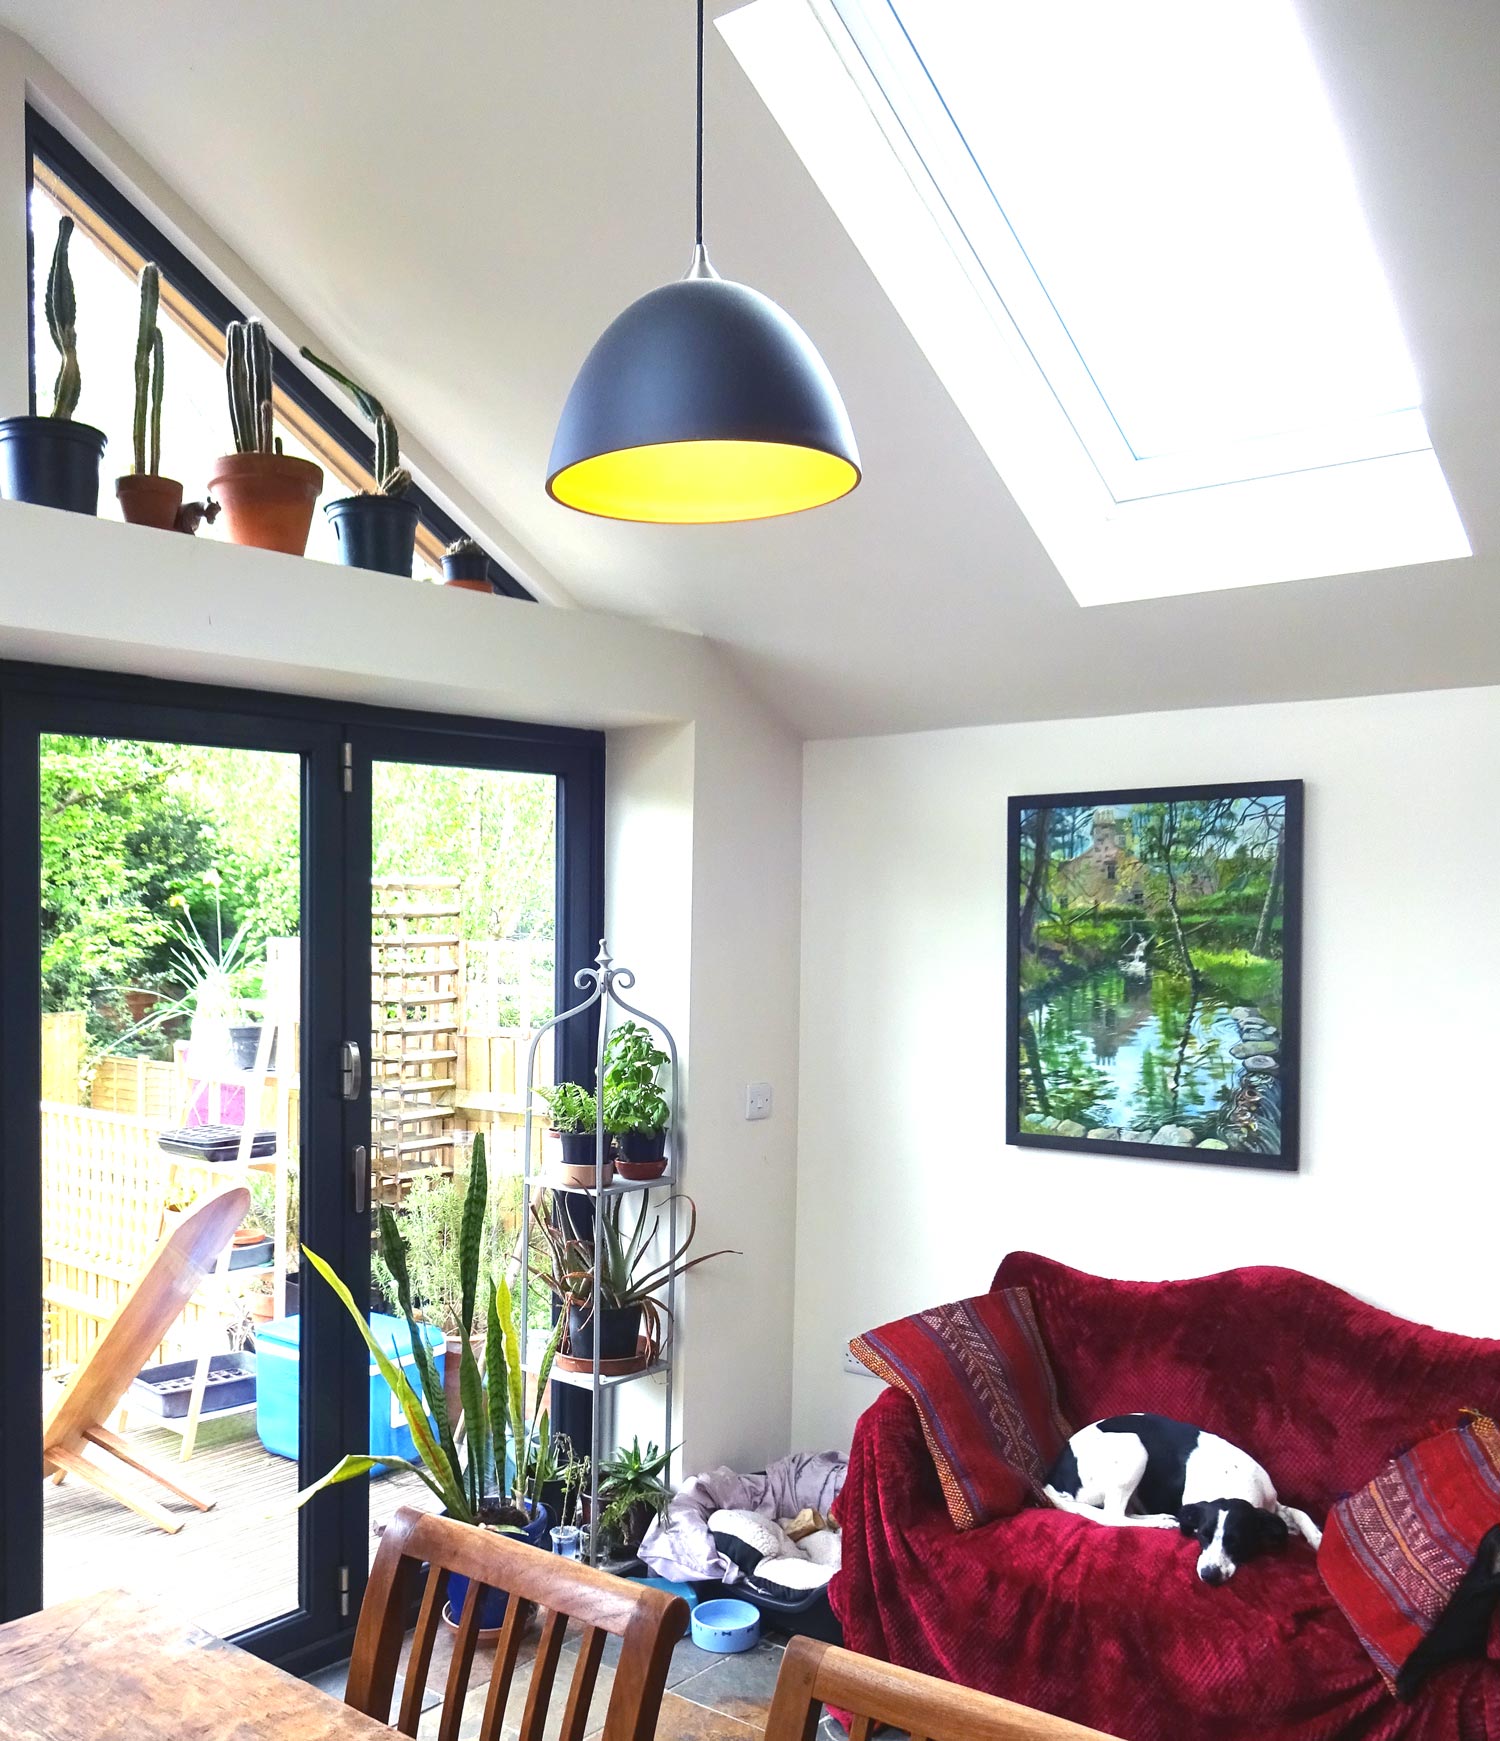 interior view of glazed gable with pendant light over dining table and dog asleep on red sofa 